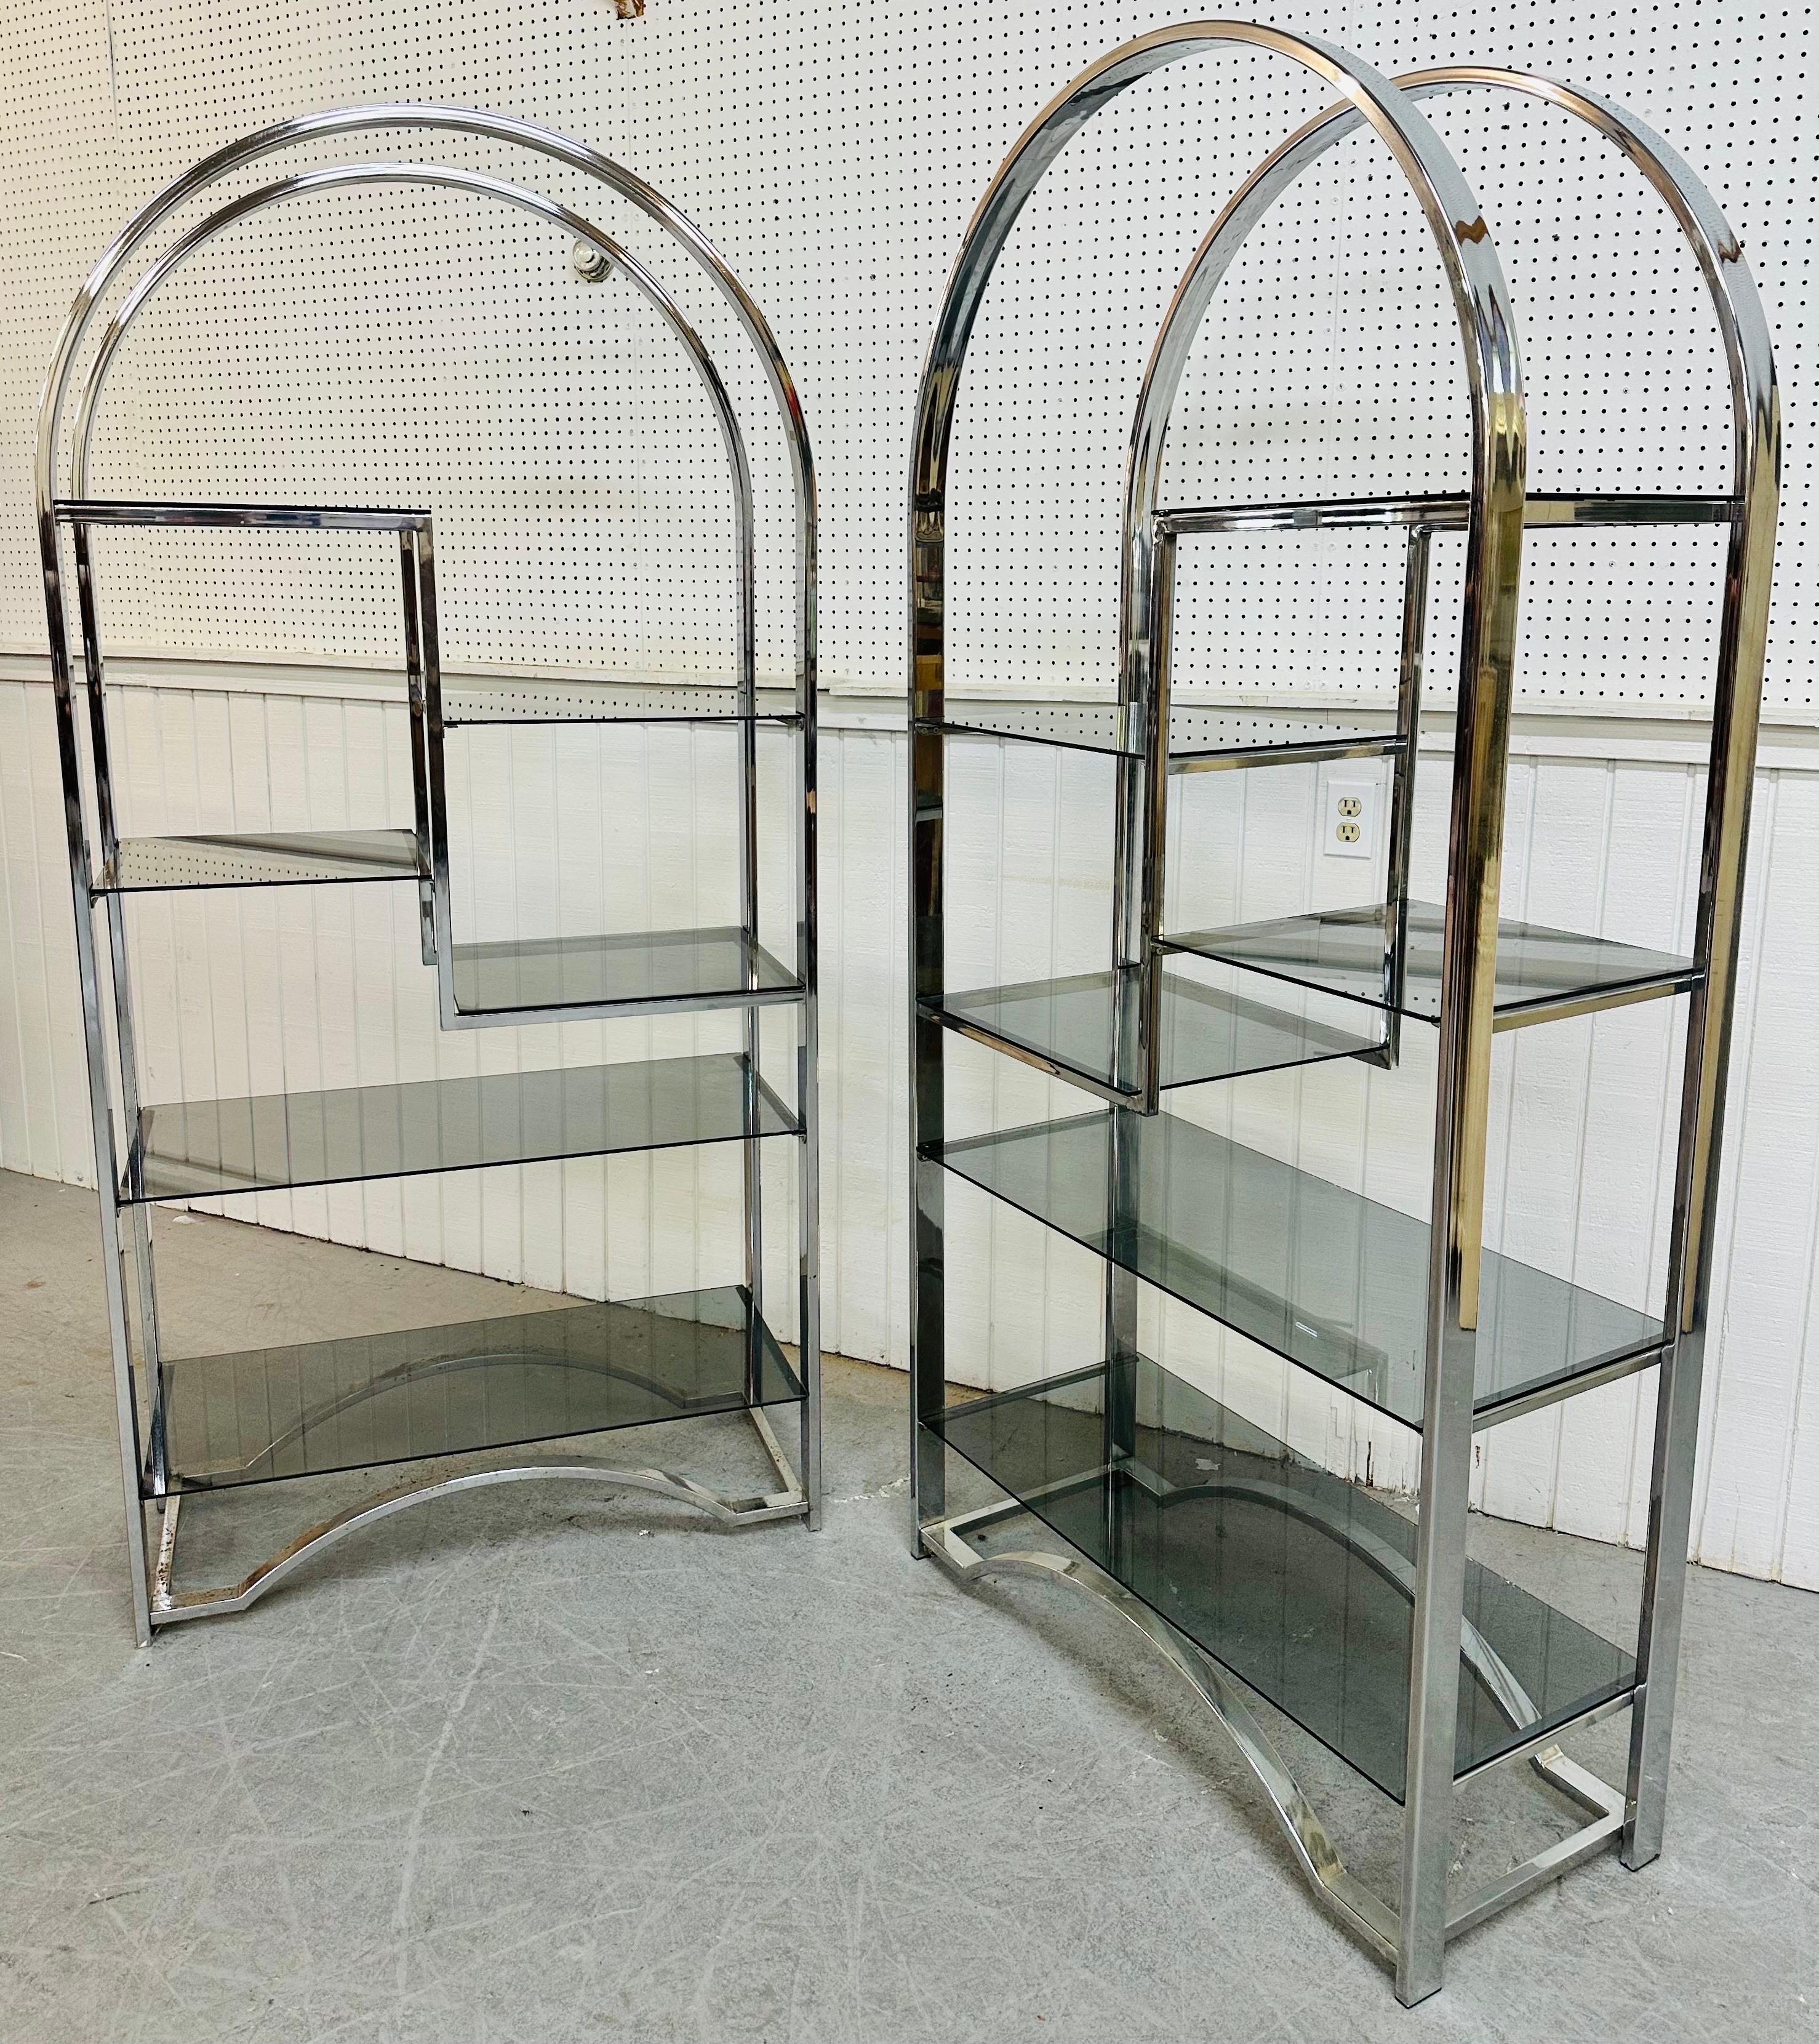 This listing is for a pair of vintage Milo Baughman Style Flat Bar Chrome Etageres. Featuring rounded tops, six smoked glass shelves, and a chrome frame. This is an exceptional combination of quality and design.